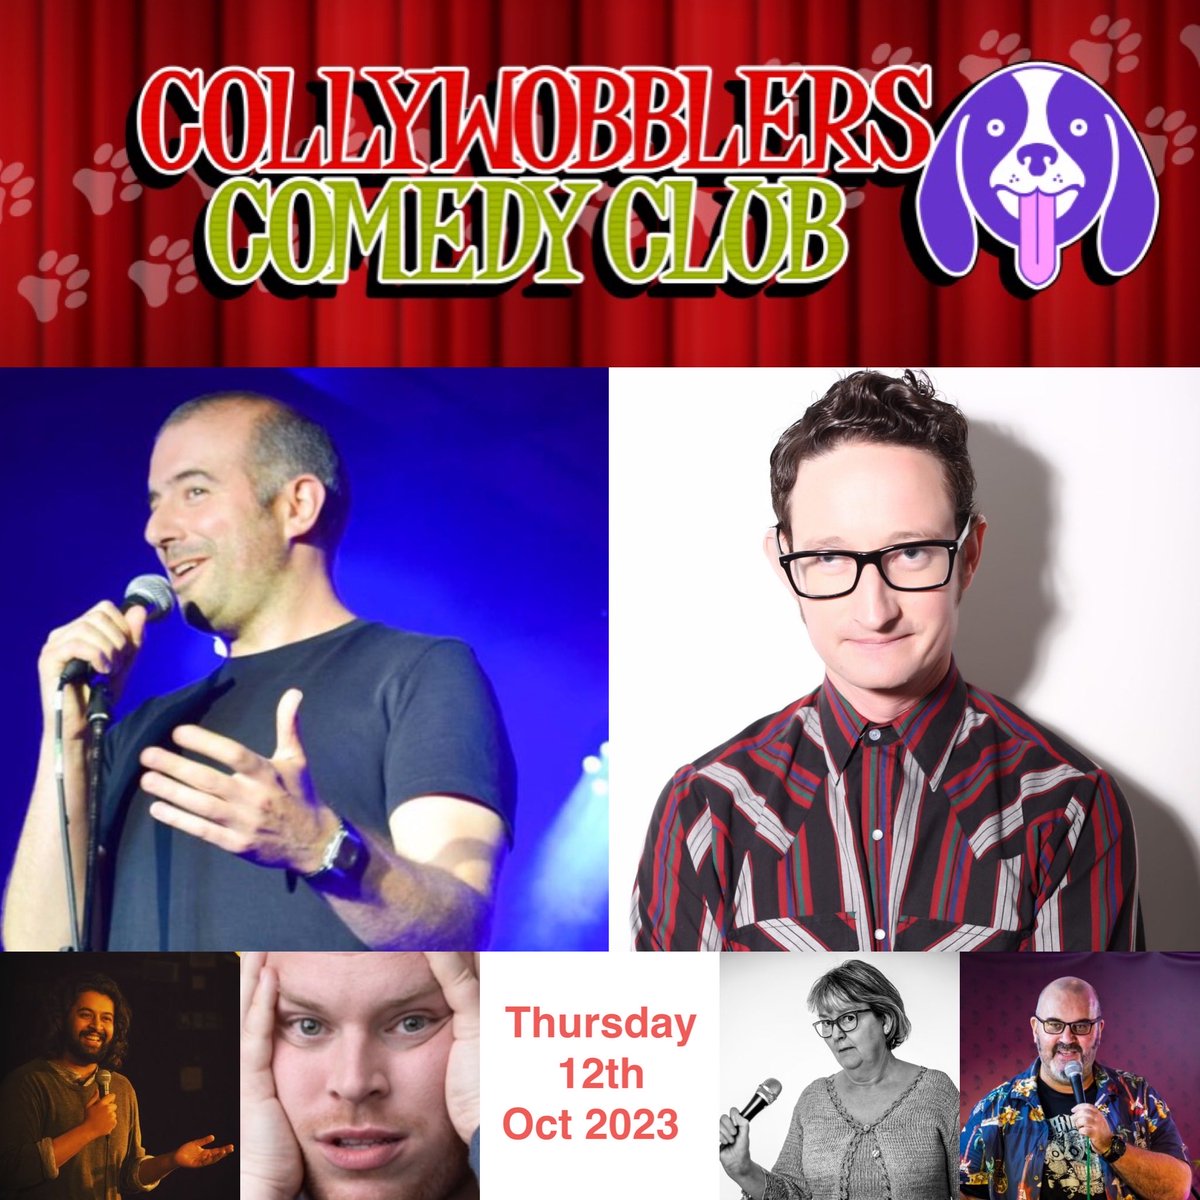 Thursday 12th October 2023 Collywobblers Comedy at The Emerald Rooms #Ruislip : Fun lineup of comedy including top comedians Plus ticket includes a free pint of Beer or Cider before 7pm- Absolute Bargain! Snap up Tickets here jokepit.com/e/10574 Ps RT